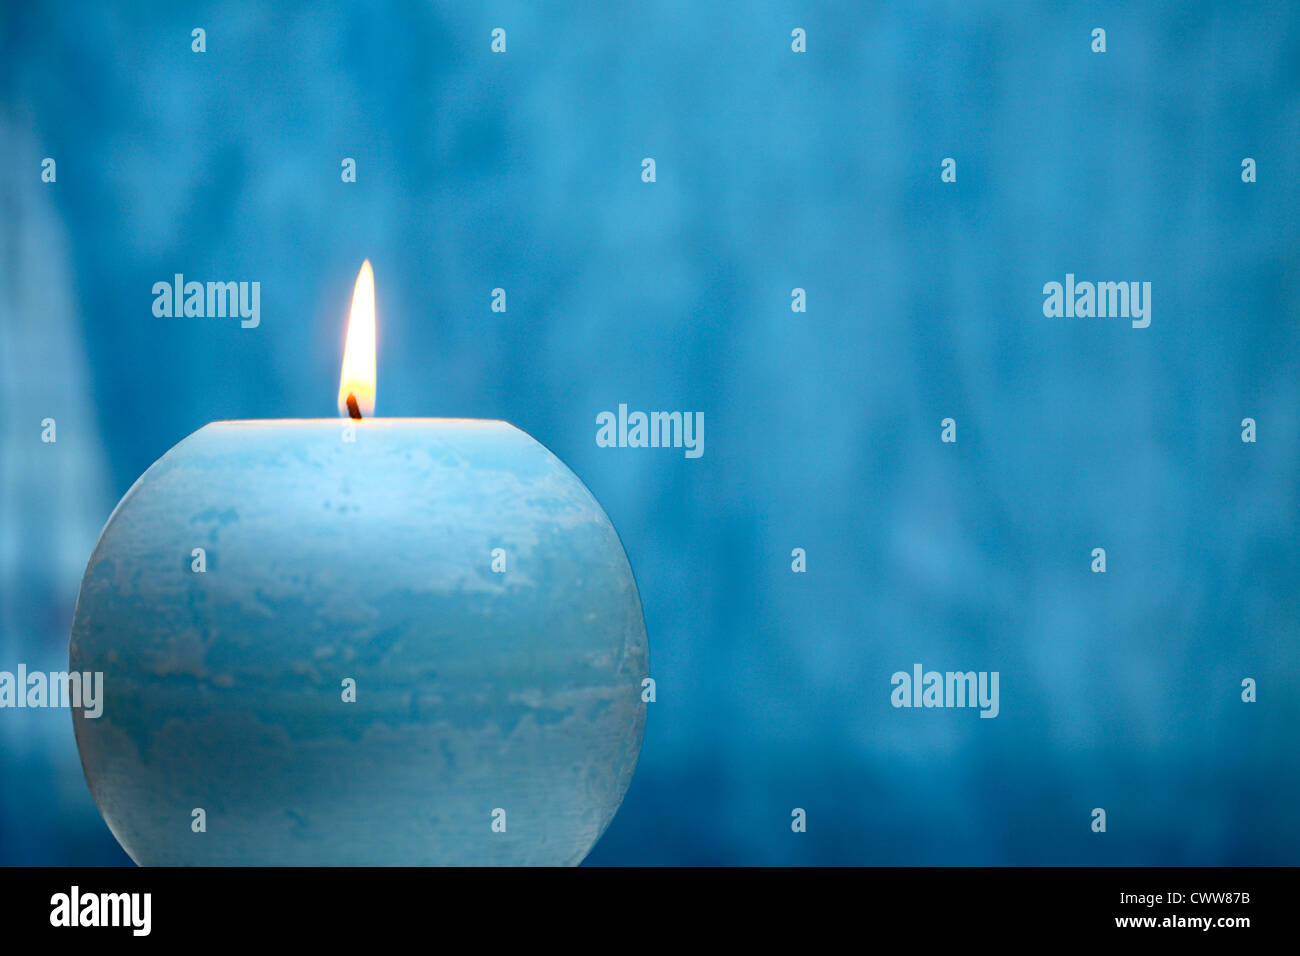 Shine bright like a candle  Blue christmas For you blue Blue wallpapers